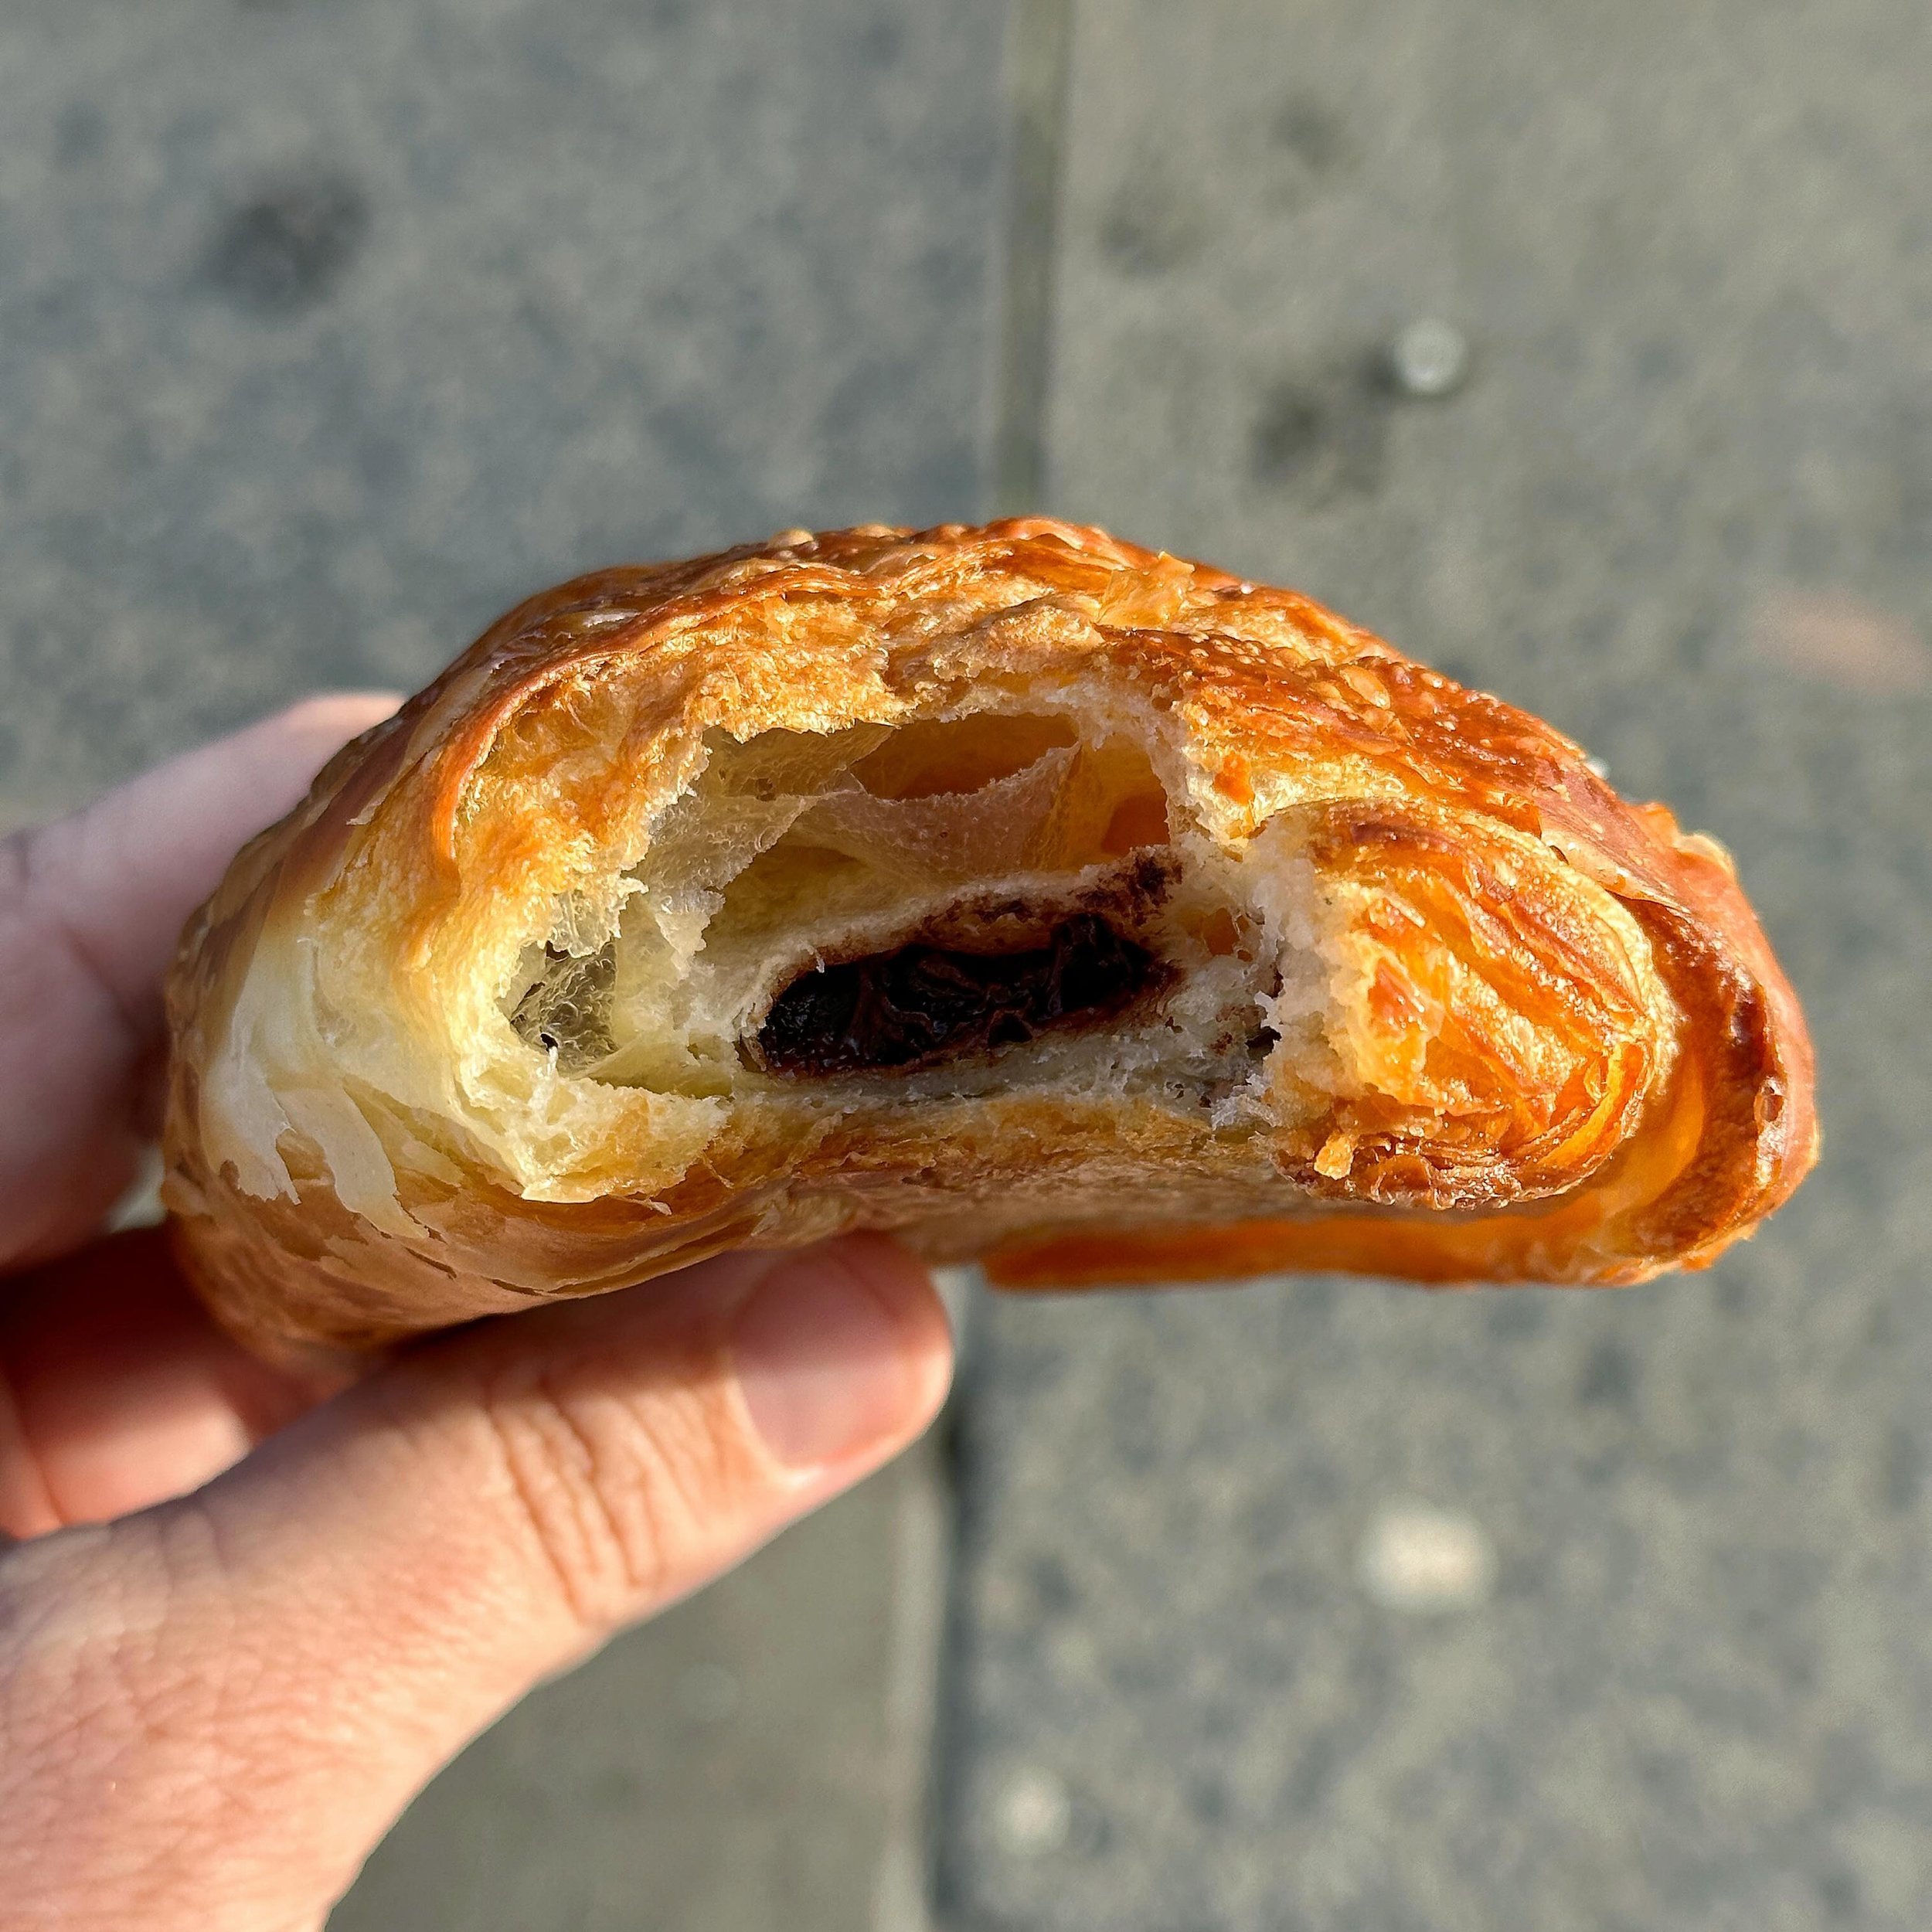 Haven&rsquo;t done a ton of food posting this trip but starting my day with this legit vegan pain au chocolat from a place I stumbled across quite literally yesterday called The Dorky French